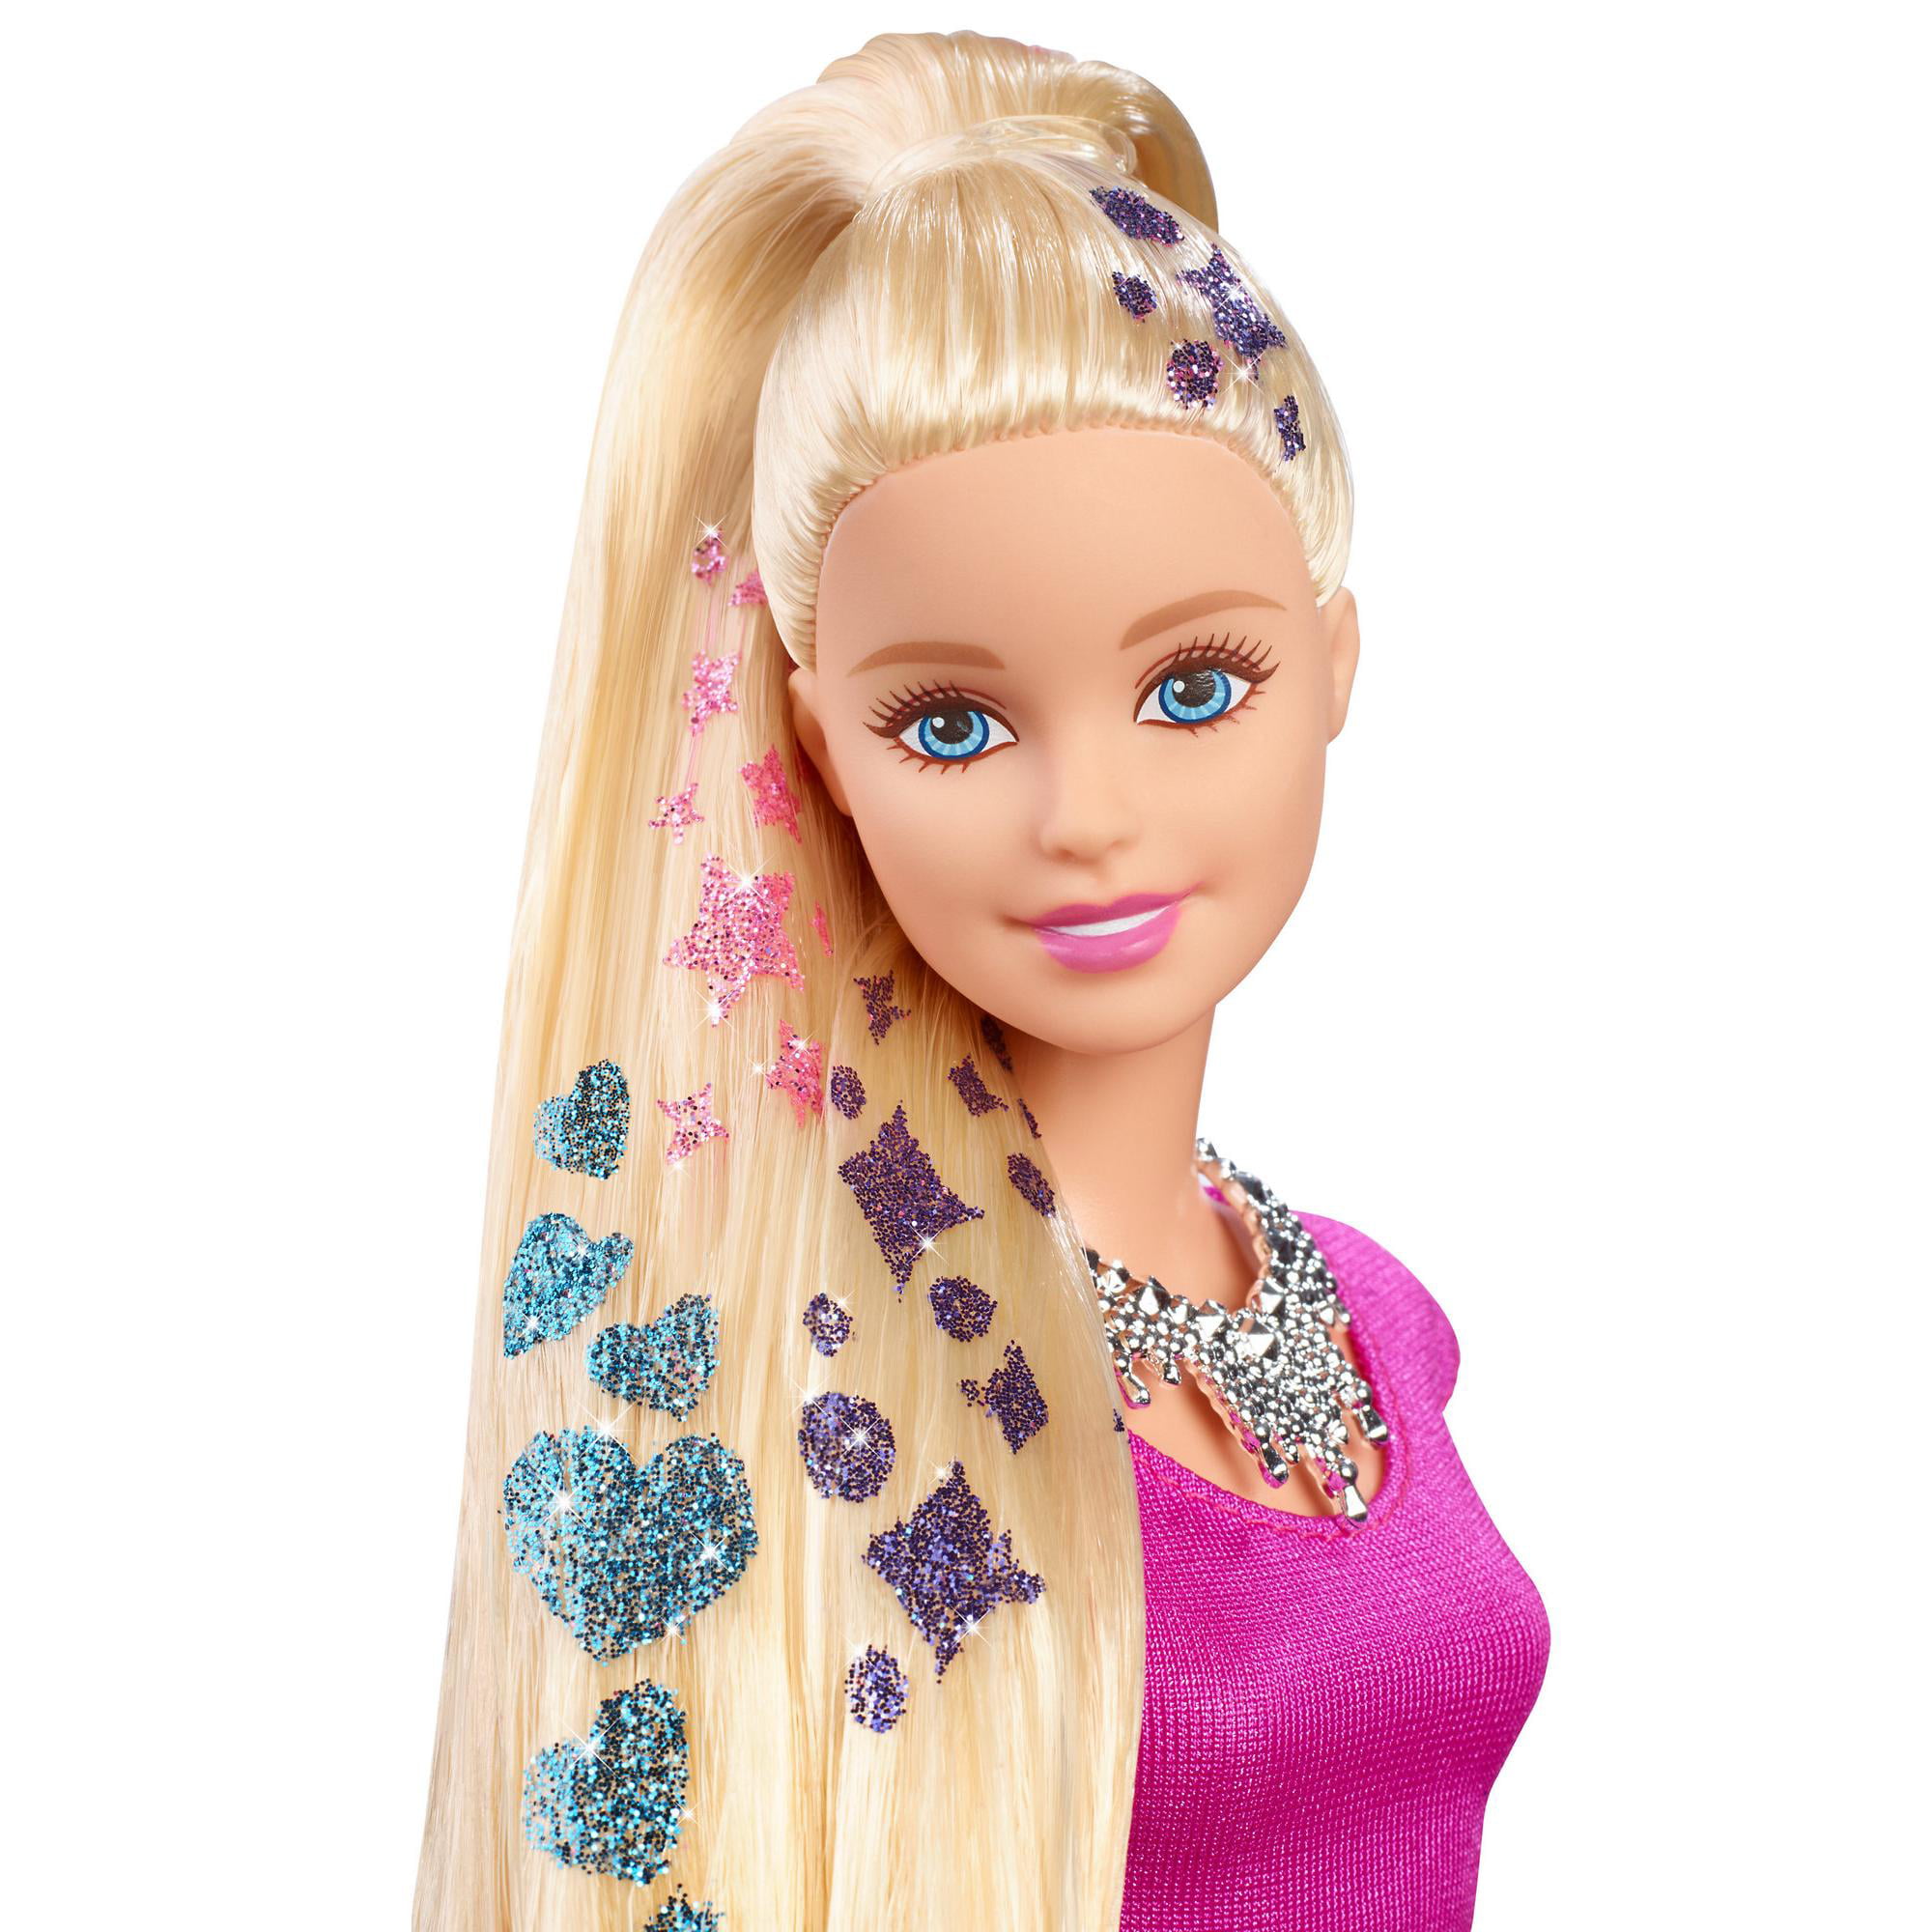 Top 17 Barbie Hairstyles That You Can Try Too